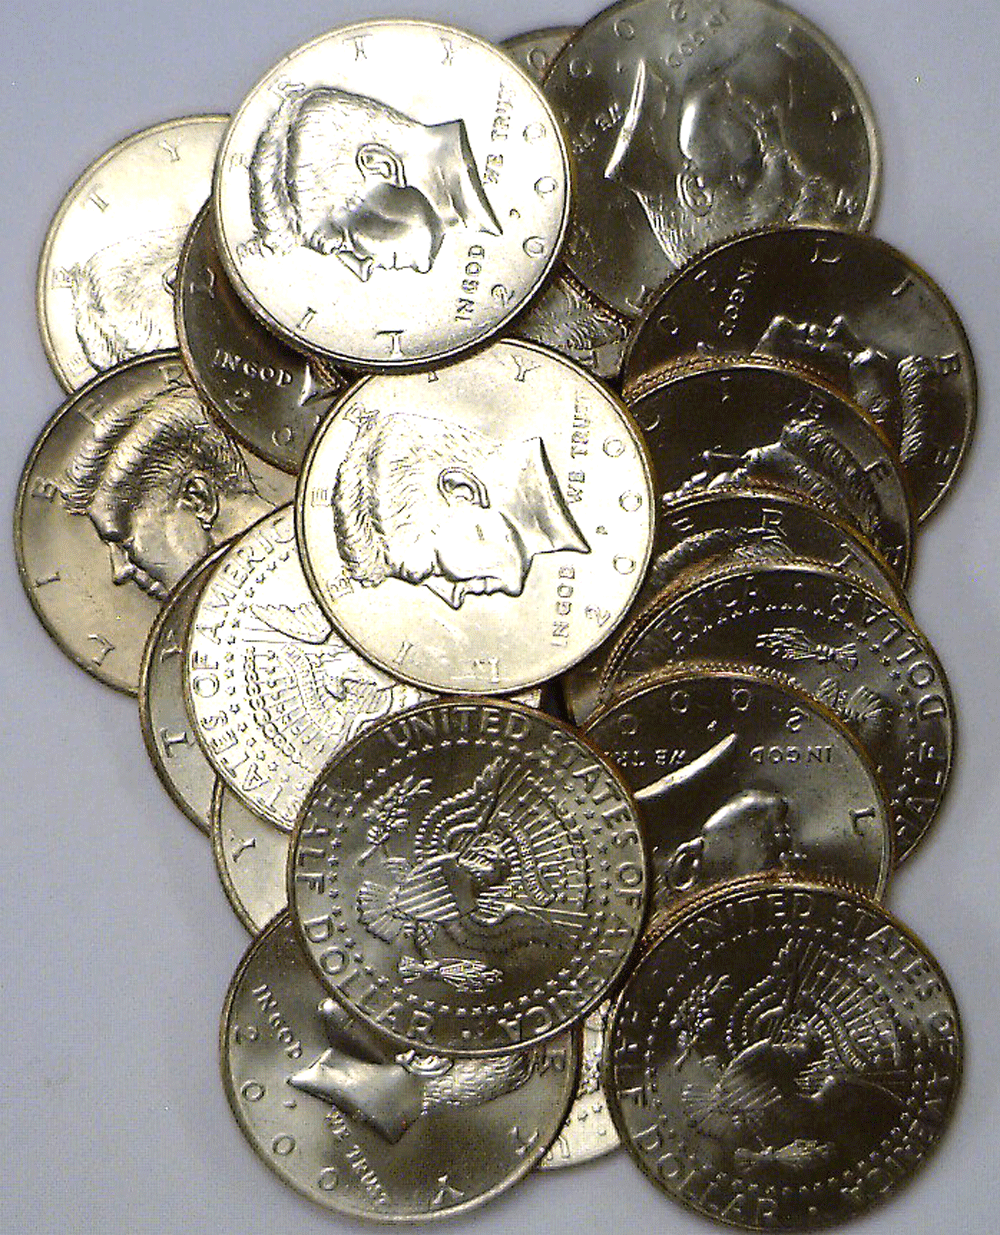 2000 P 50C Kennedy Half Dollar Max 62% OFF $10 Face Roll Coin Finally resale start Fr 20 Straight